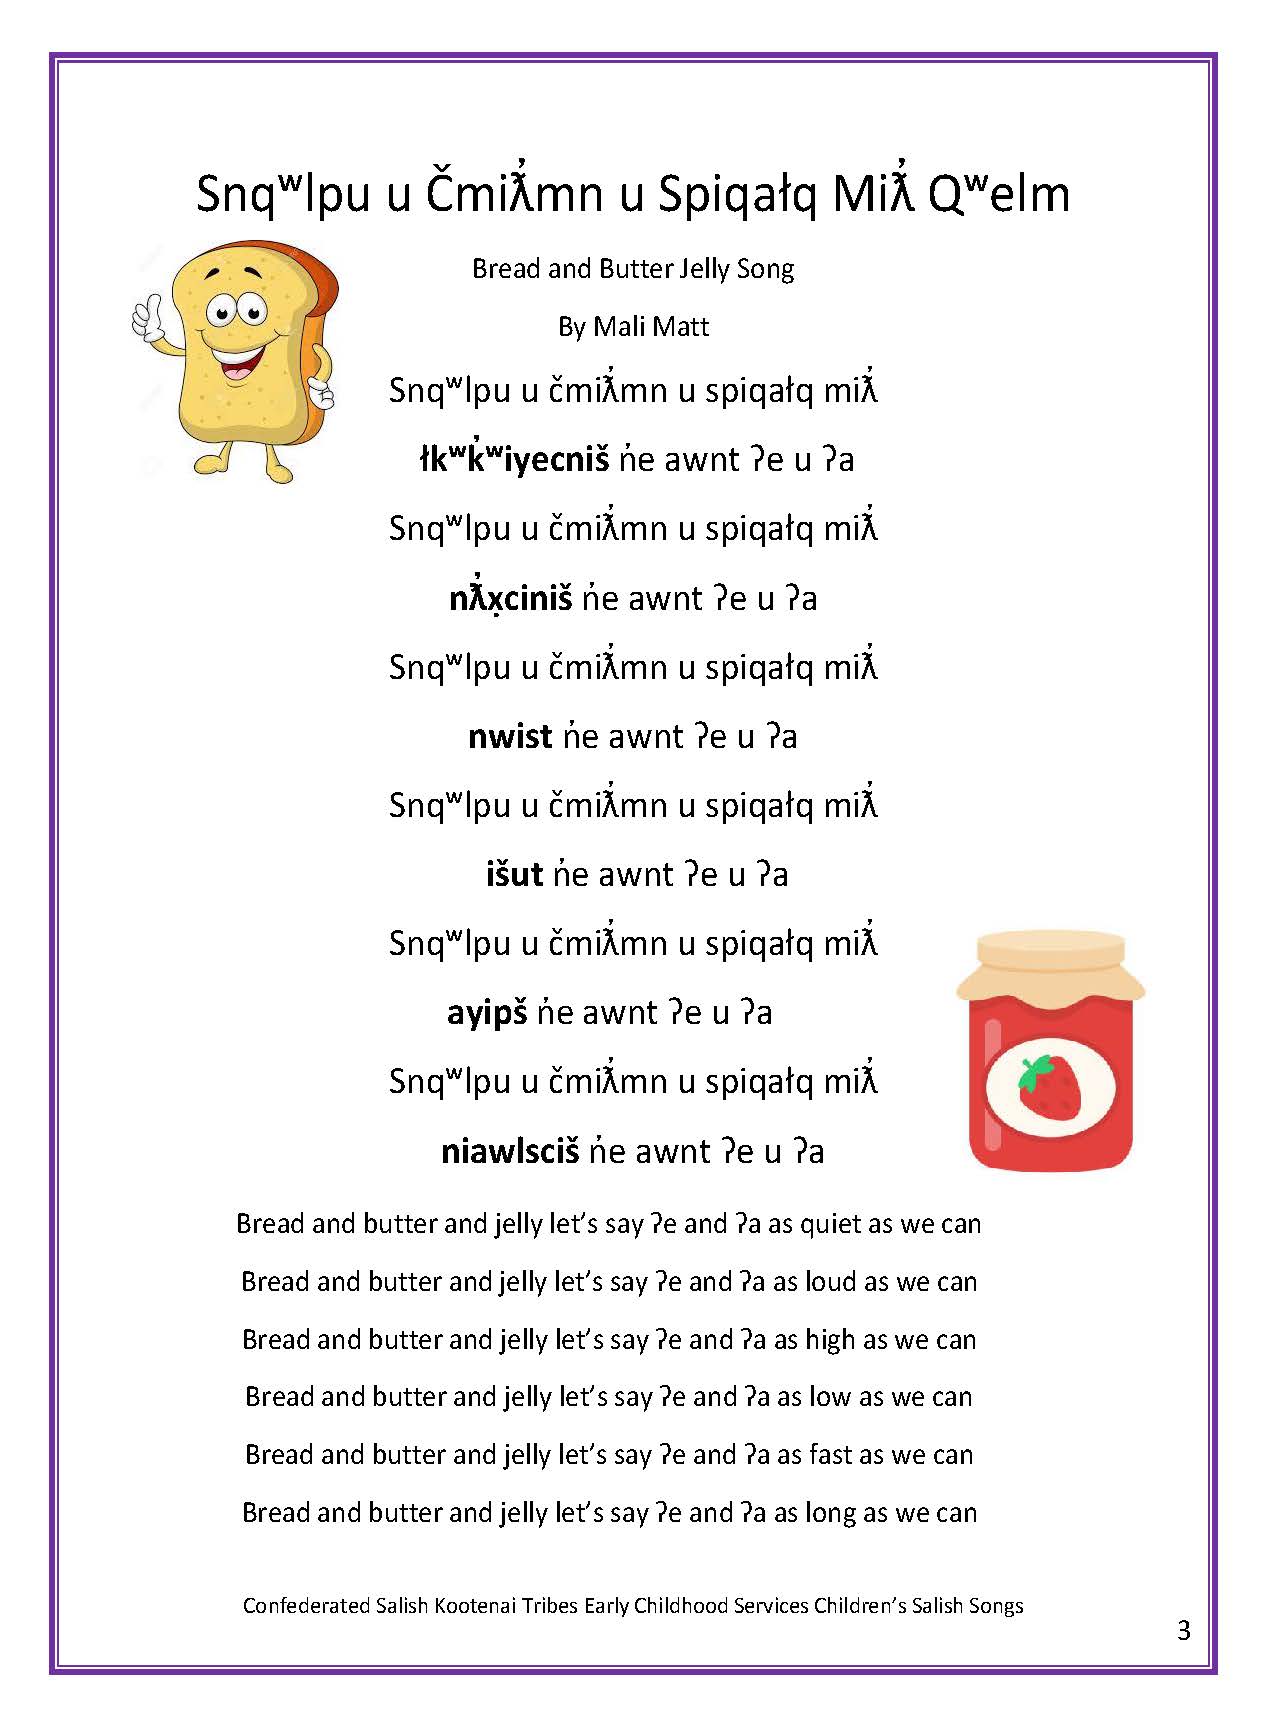 ECS Childrens Salish Song Book Page 08